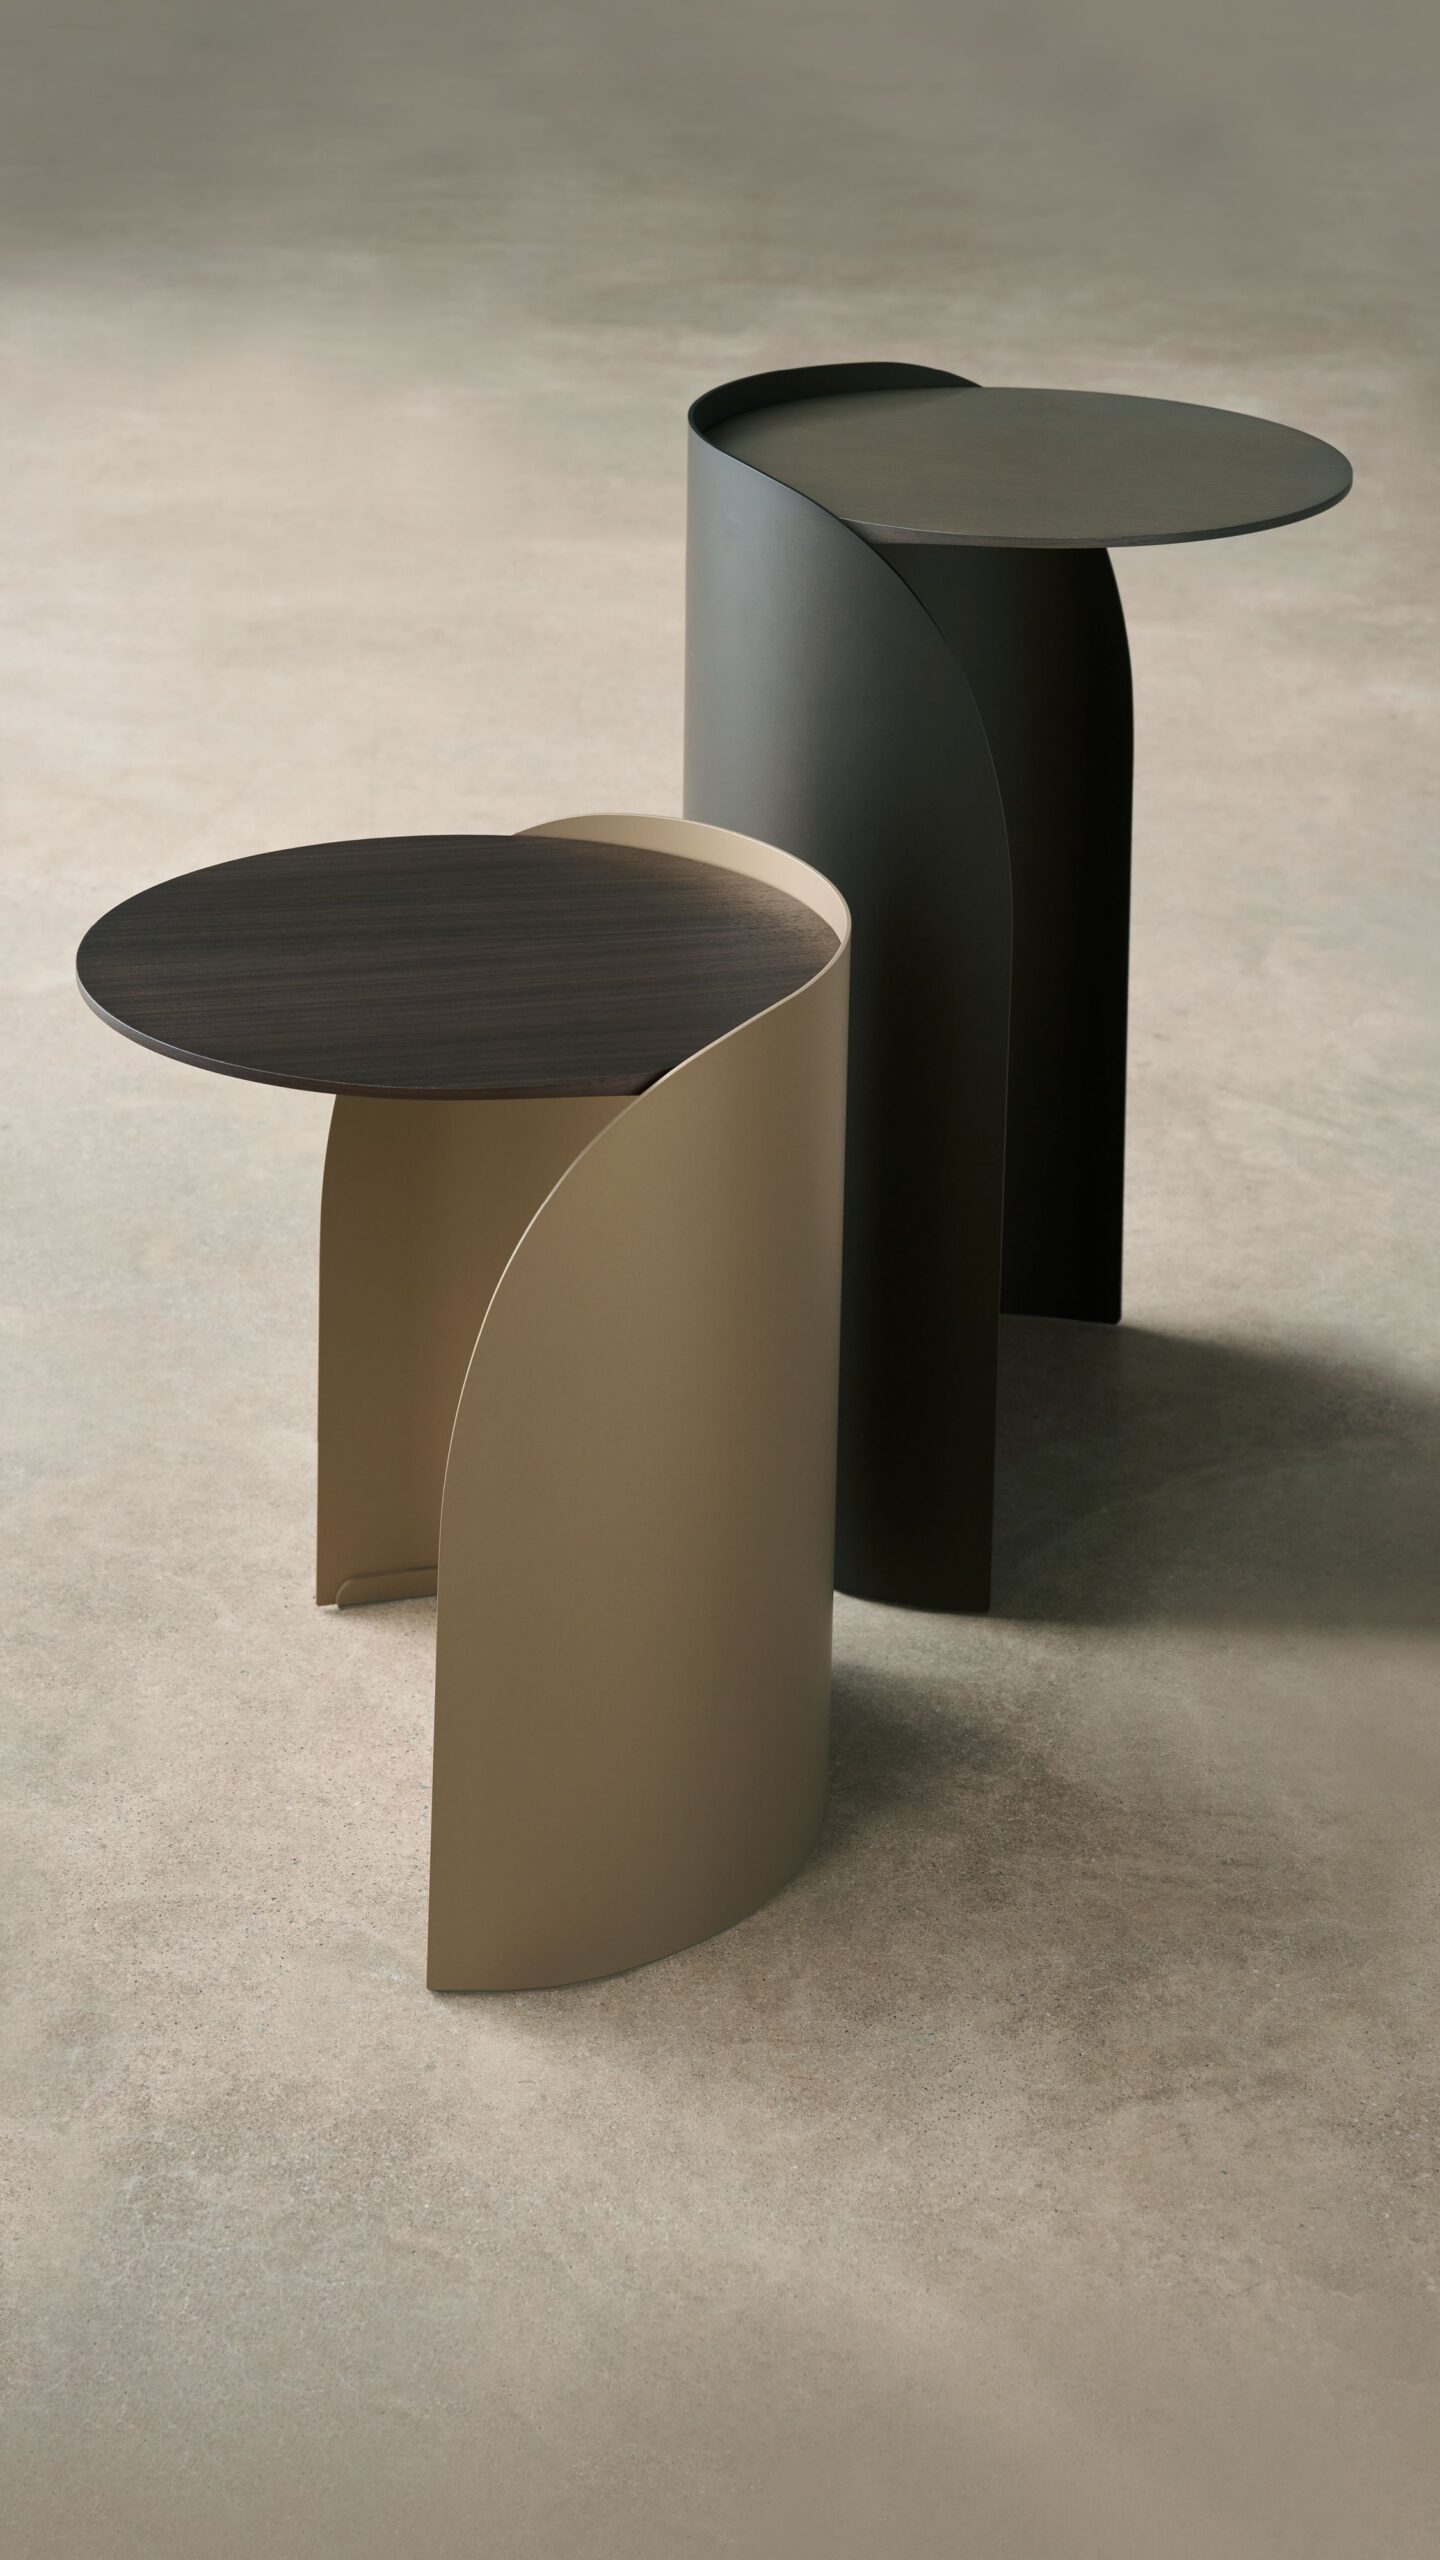 Side Tables Design : Top 10 Innovative Side Table Designs for Your Home Décor